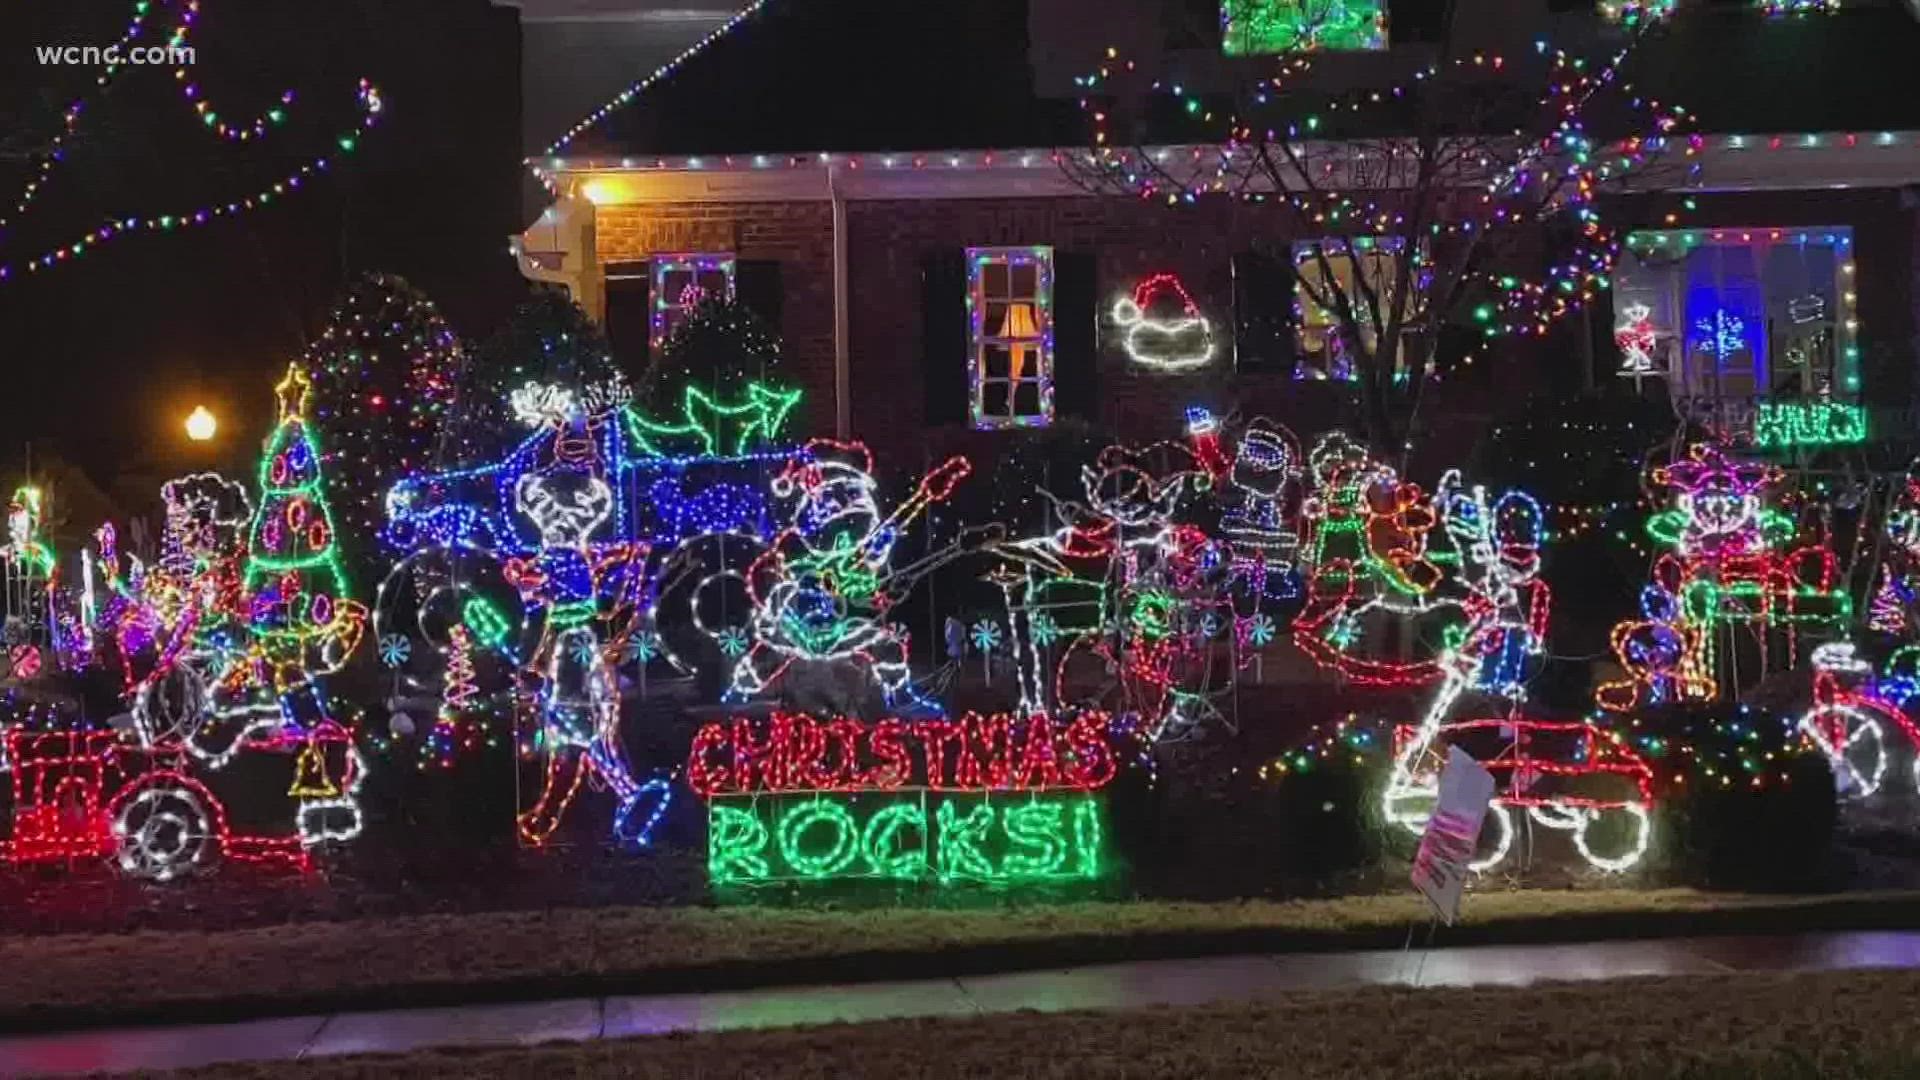 If you're staying in town or hosting family this year, driving around to look at Christmas lights is always a great family-friendly activity.